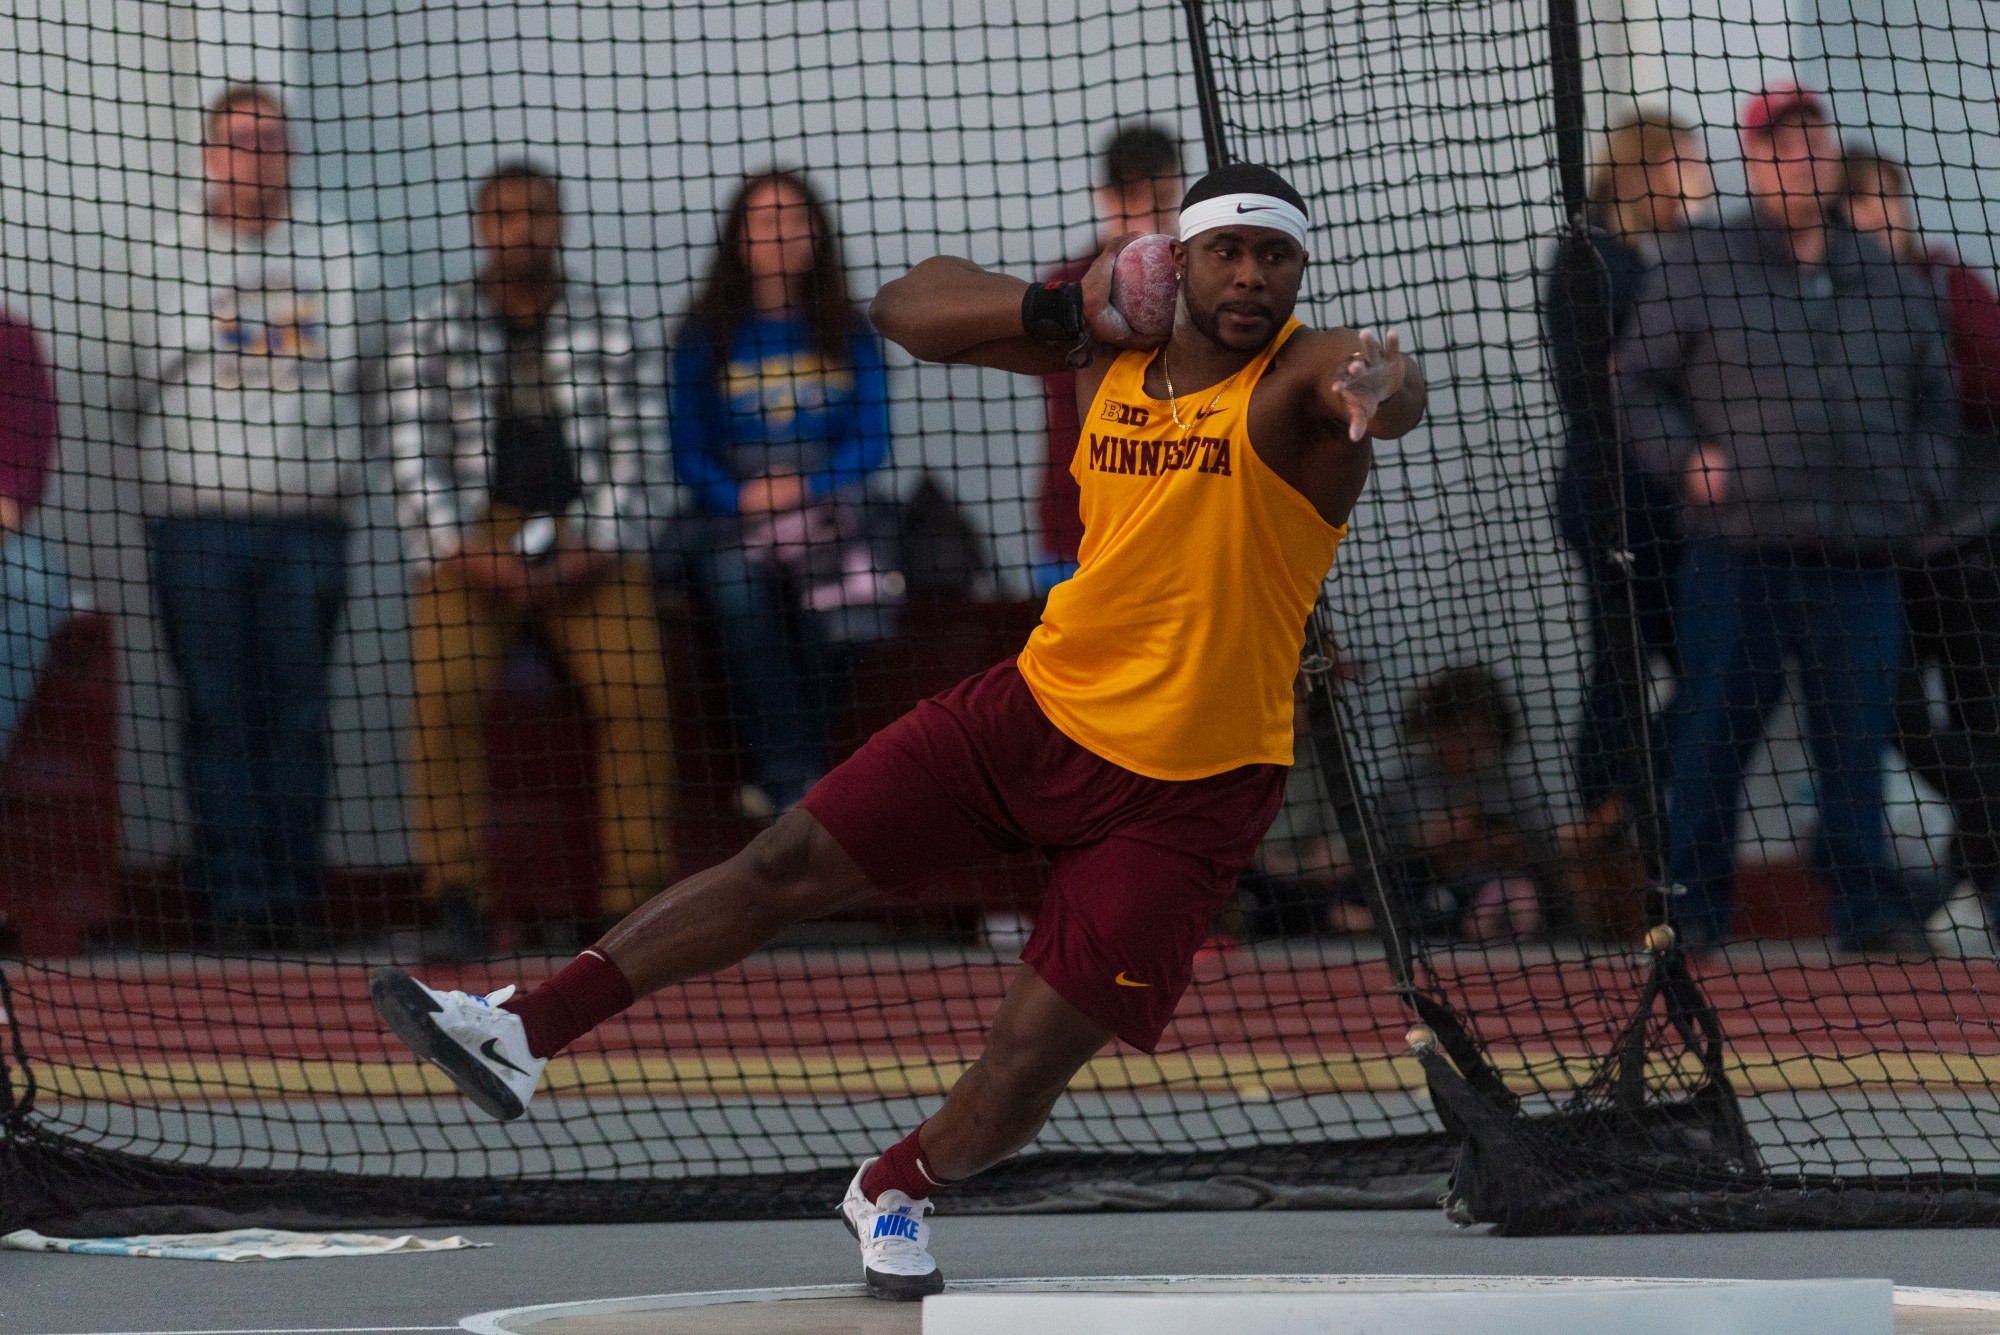 Gophers Junior Kevin Nedrick competes in the shot put at the Minnesota Cold Classic at the University of Minnesota Fieldhouse on Friday, Feb. 21.